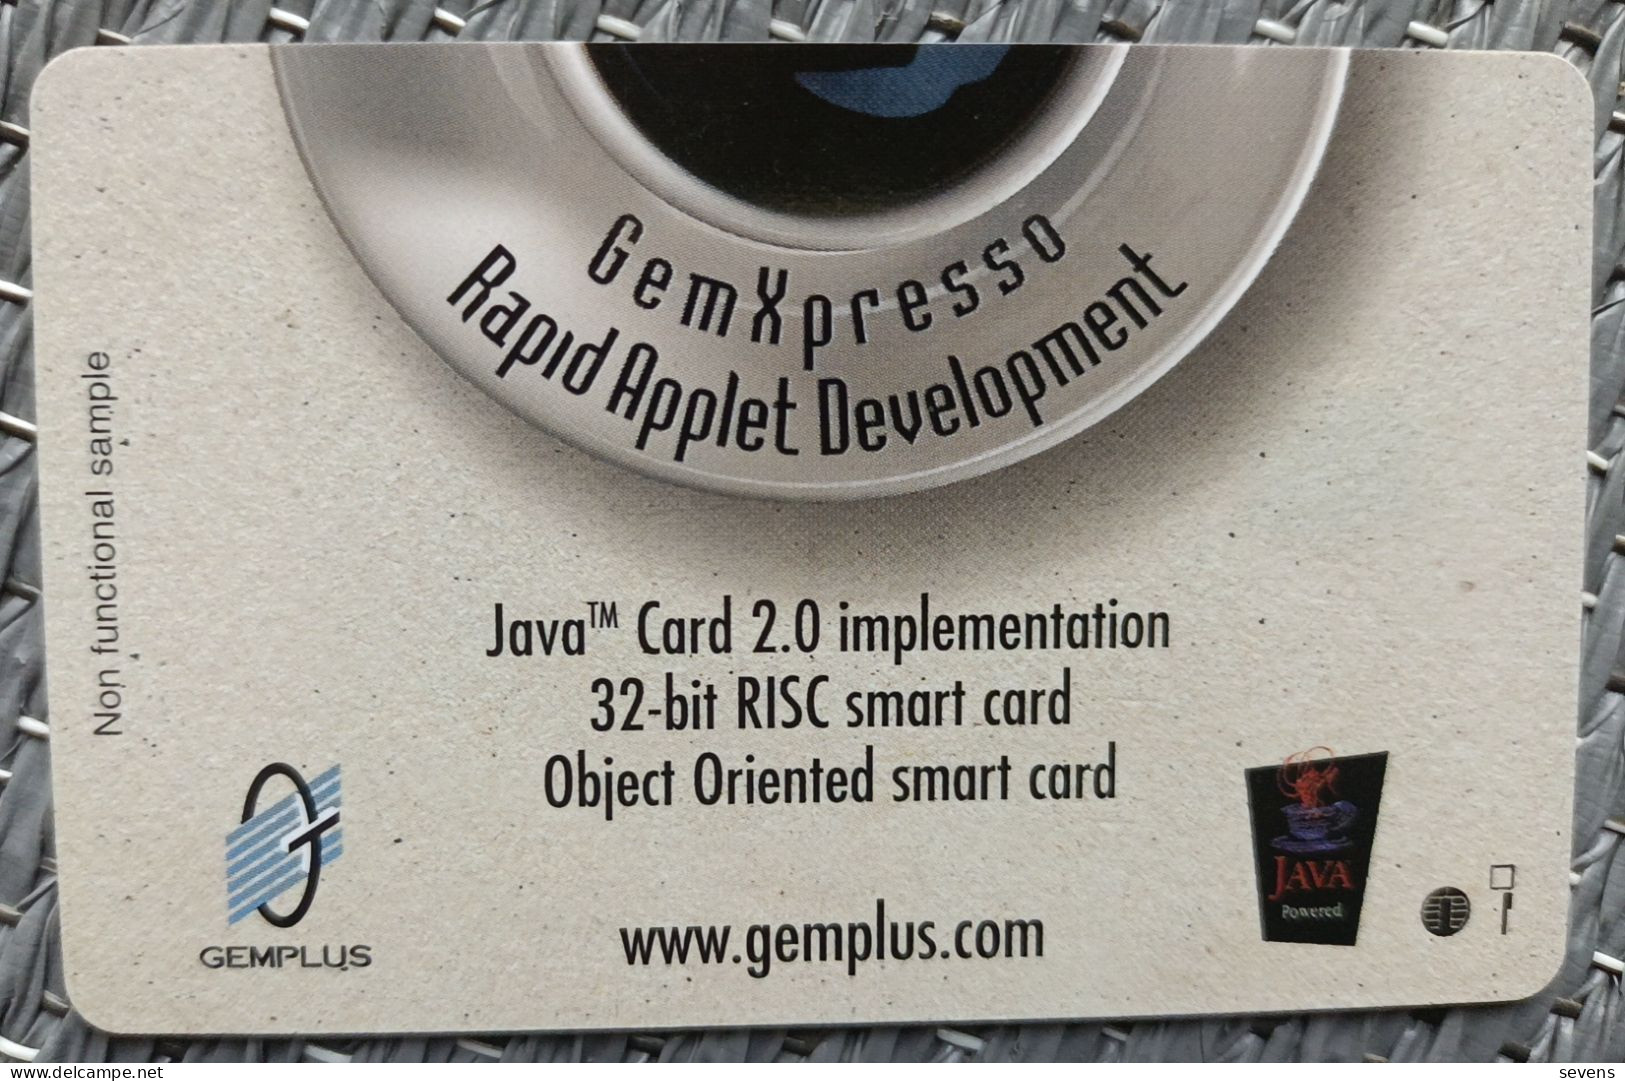 Gemplus GemXpresso Chip Card, Sample, Buy Your Kit Now - Unclassified